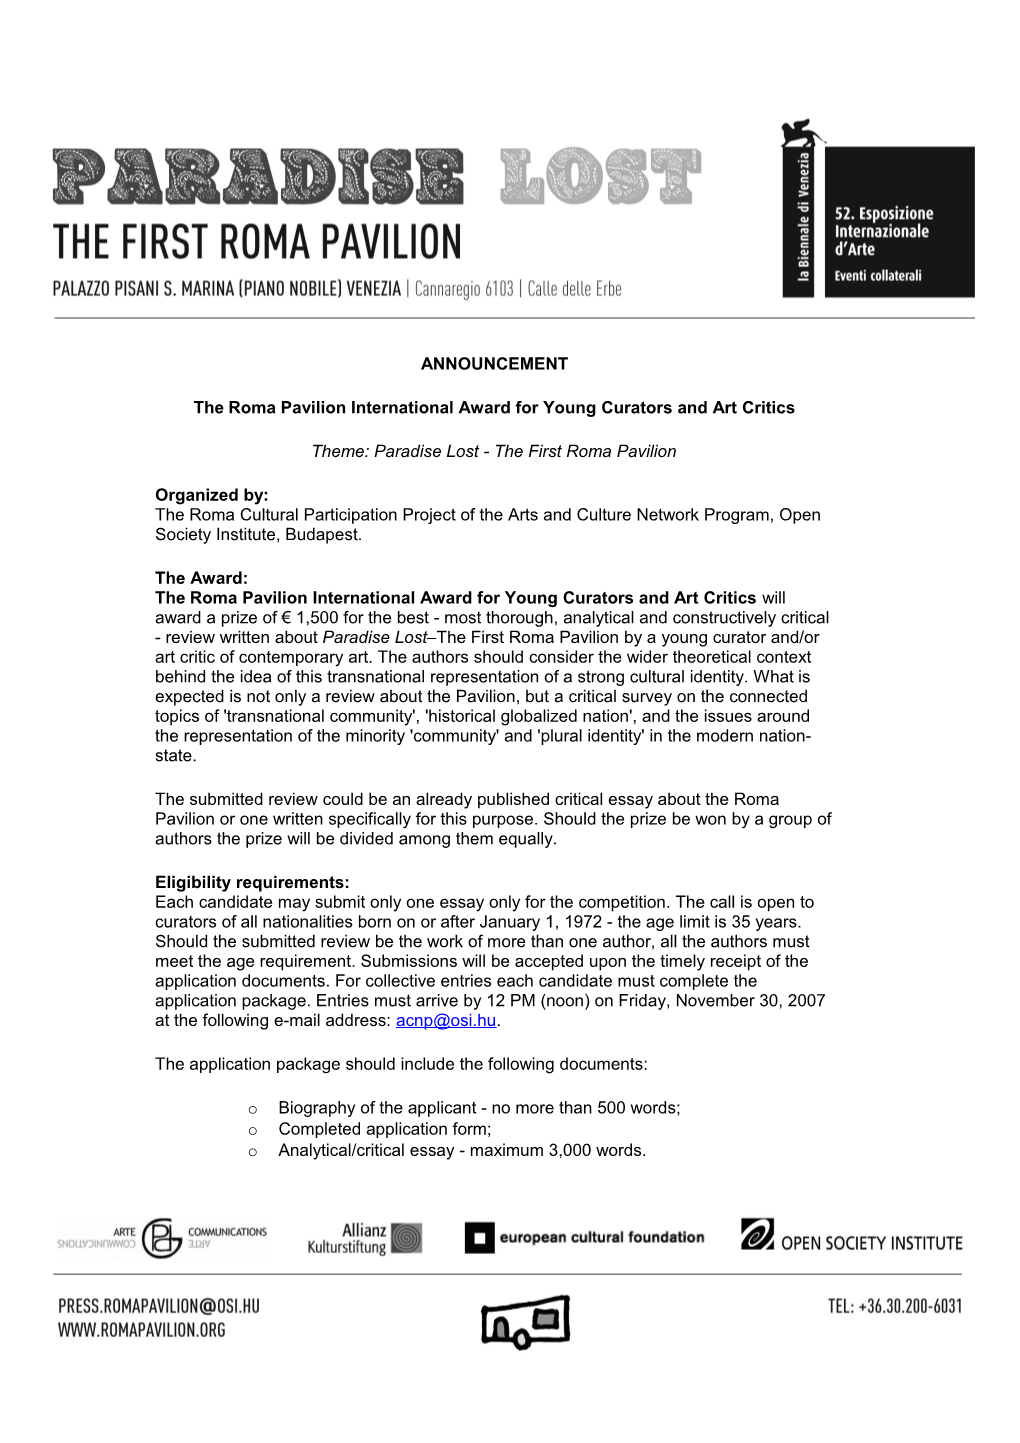 Theroma Pavilion International Award for Young Curators and Art Critics